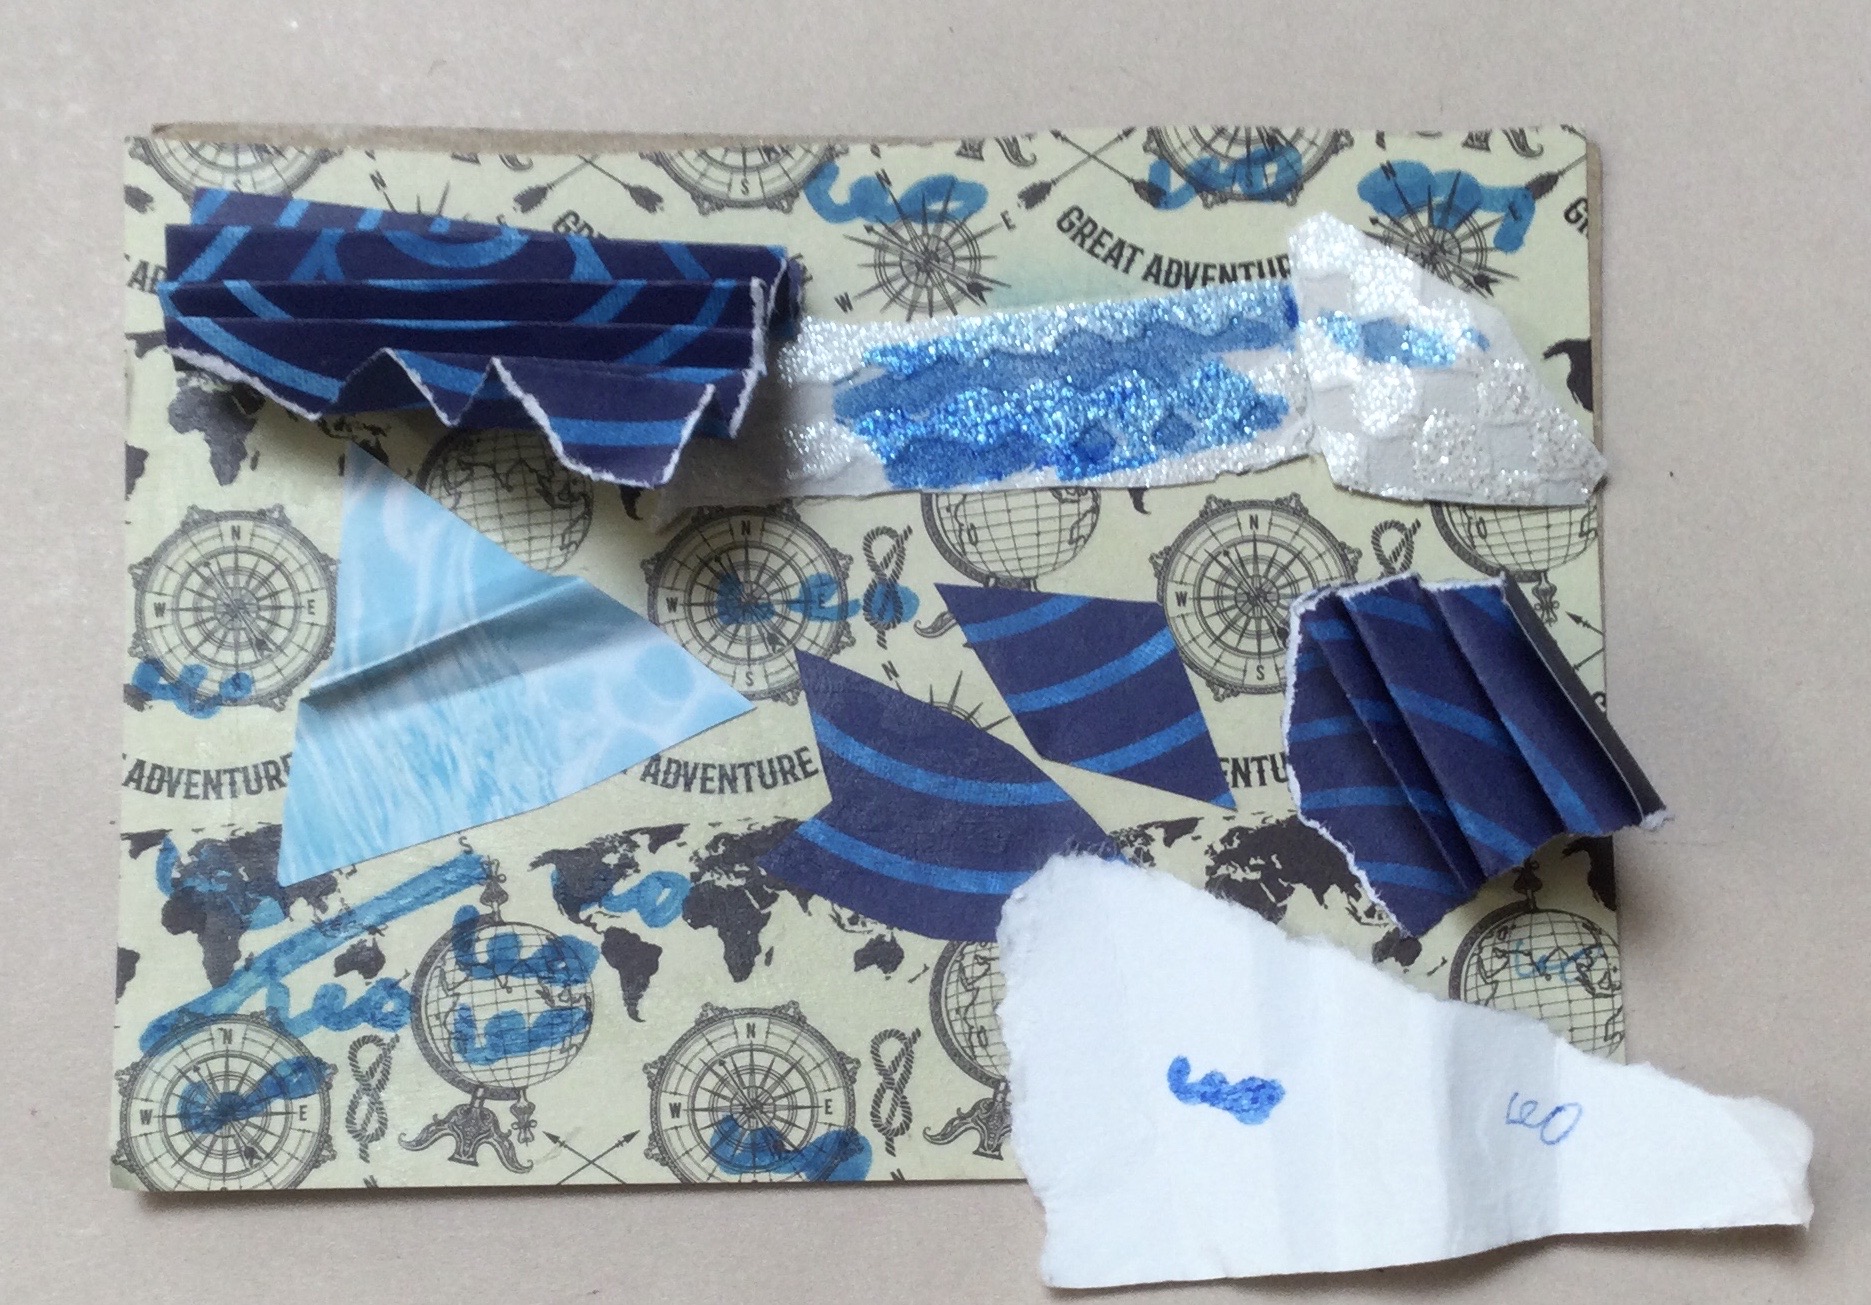 A postcard collaged with a background of paper showing compasses, globes and the words Great Adventure, overlaid with blue patterned papers, some of them folded like concertinas to represent waves